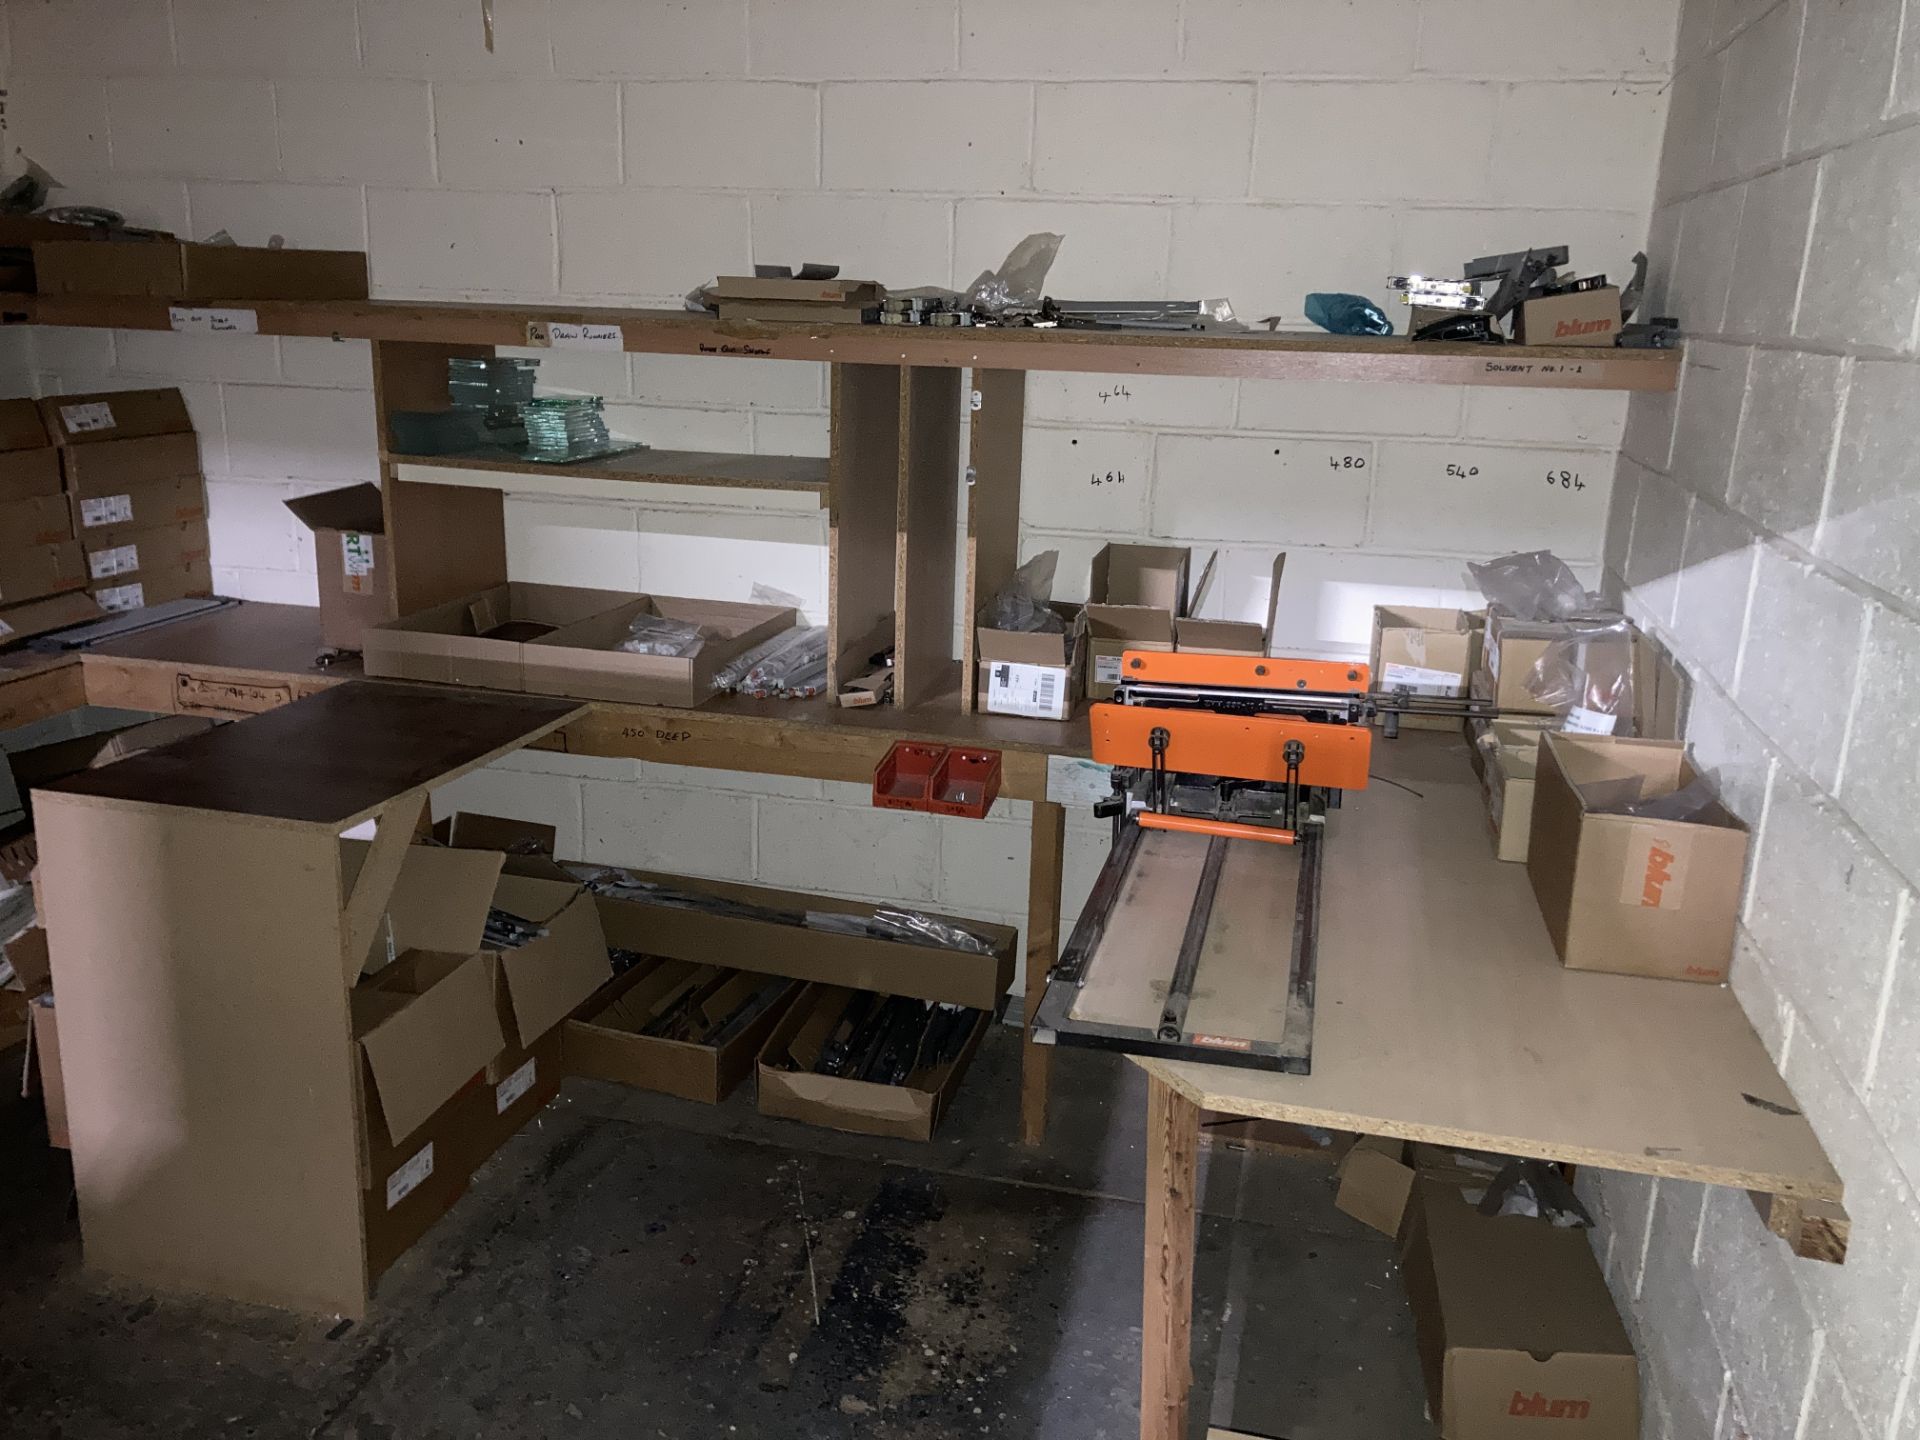 A quantity of drawer components and manual assembly jig